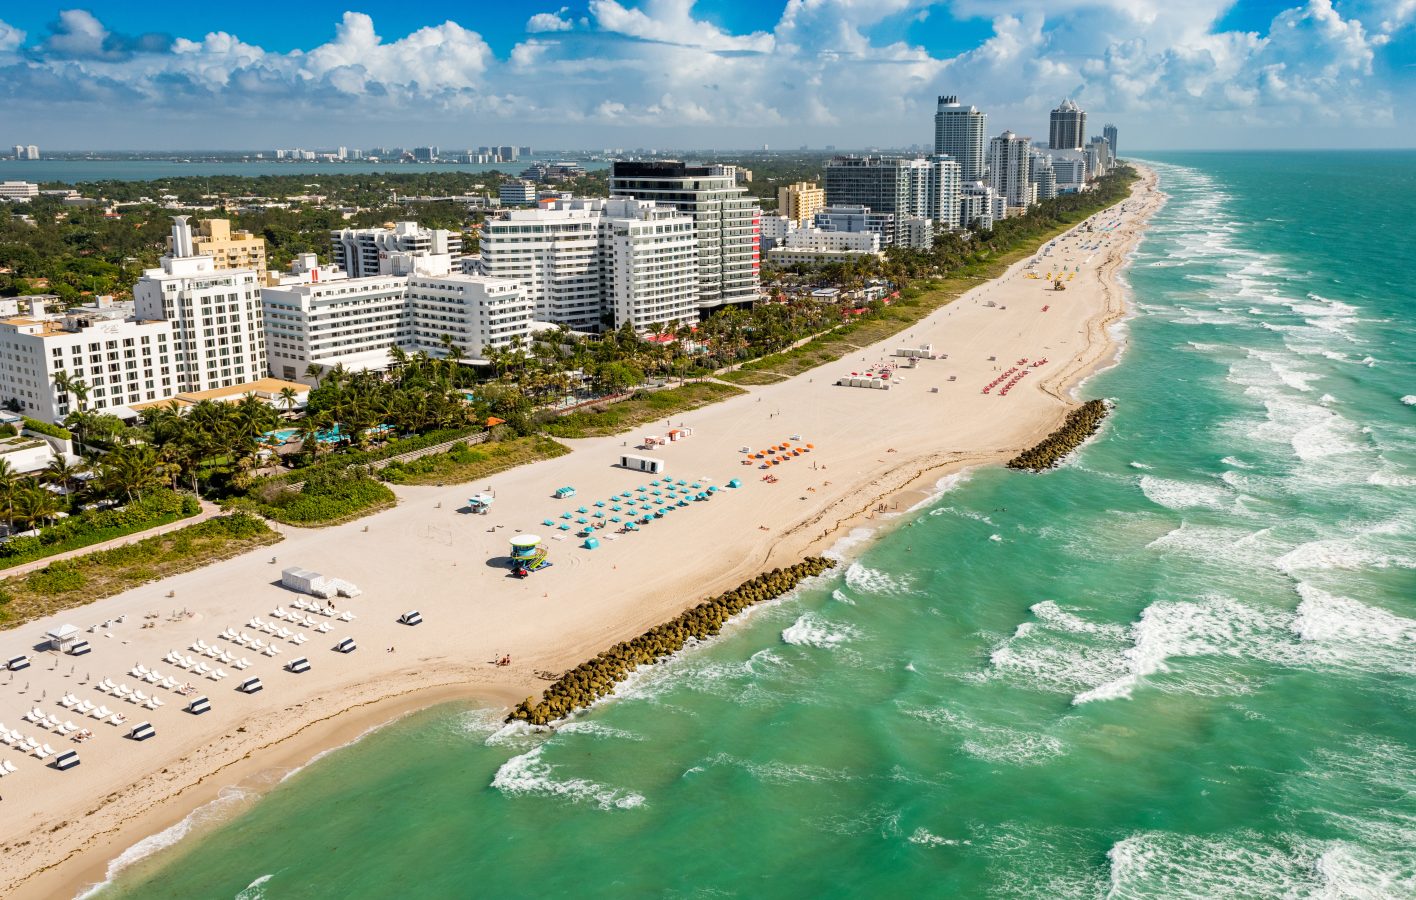 Aerial shot of Miami beach, Florida - considered one of the best spring break destinations for 2023.